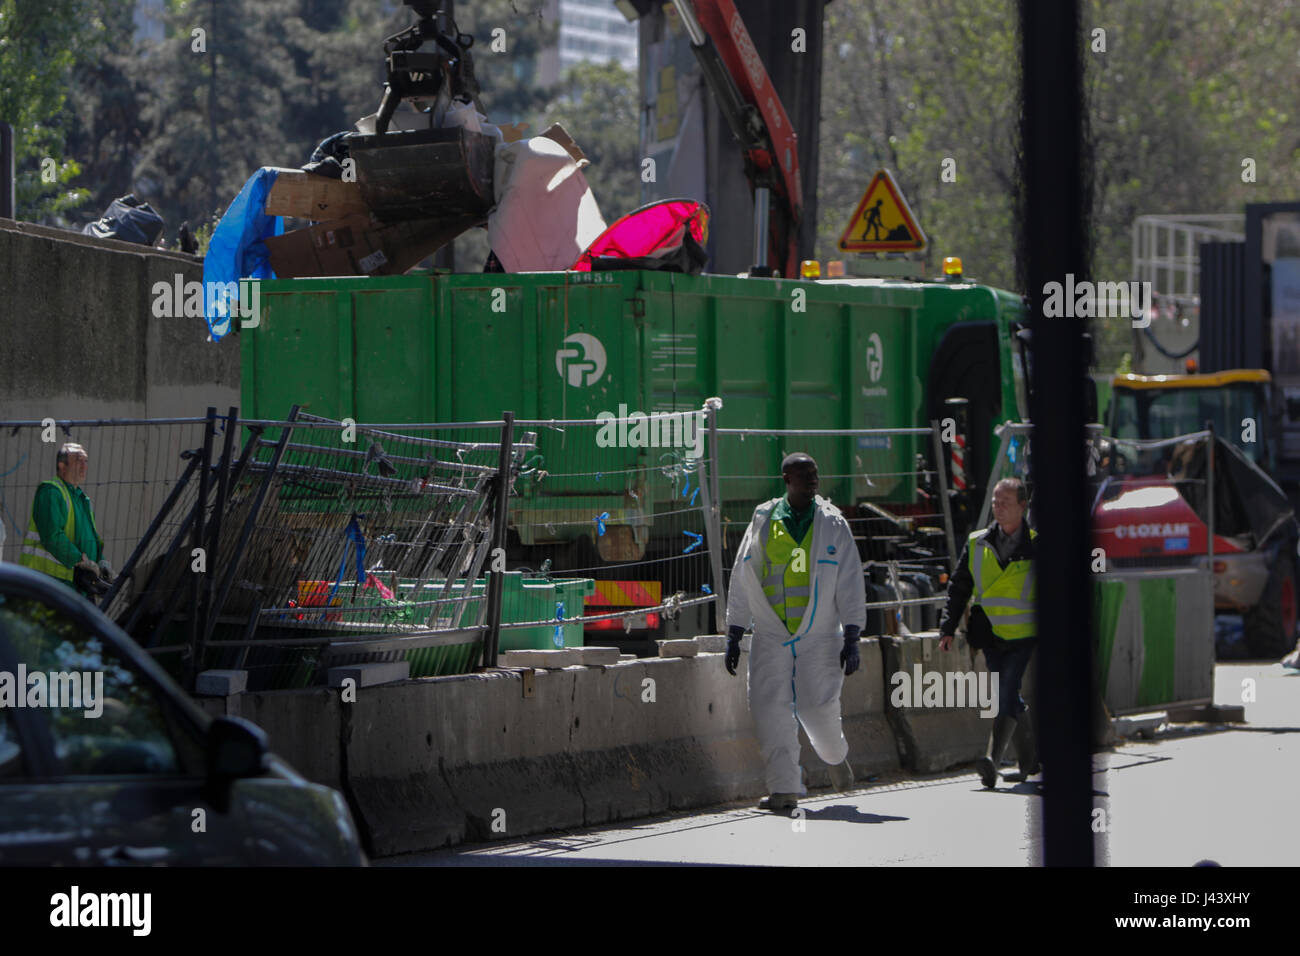 Paris, France. 9th May 2017. City workers dump the remains of the camp into big refuse container. City officials of Paris are cleaning the abandoned tents of the refugee camp that has spread around the reception centre. The camp was evicted earlier in the morning. Credit: Michael Debets/Alamy Live News Stock Photo